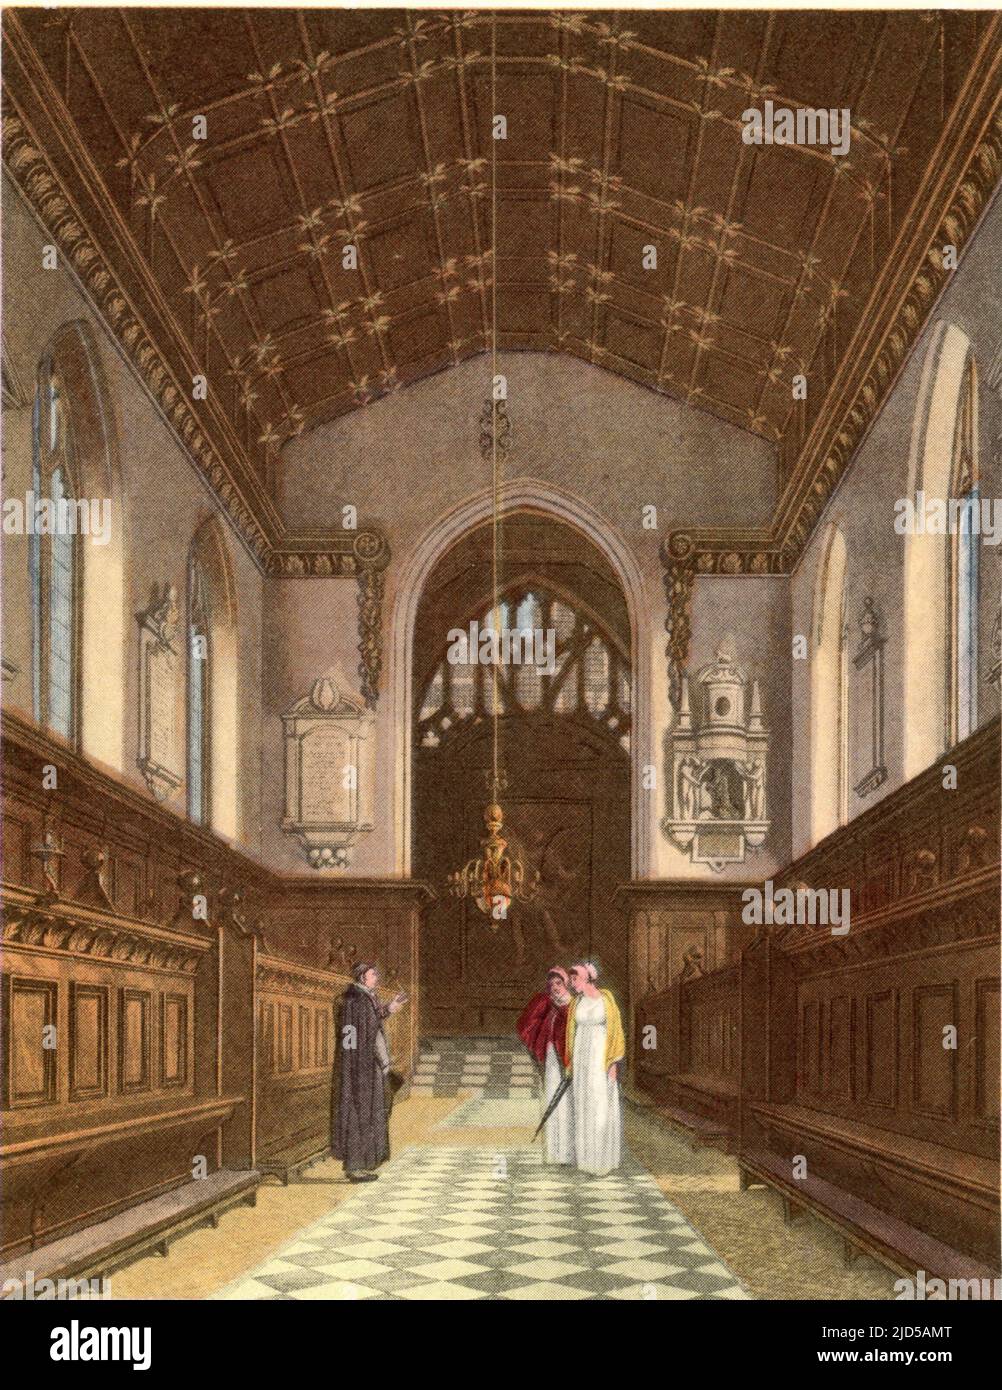 Jesus College Chapel, 1814. Jesus College is one of the constituent colleges of the University of Oxford in England. The chapel was dedicated on 28th May 1621, and extended in 1636. A print from 'A History of the University of Oxford, its Colleges, Halls, and Public Buildings', published by Rudolph Ackermann, 1814. Ilustrated by Augustus Pugin, F. Mackenzie and others. Stock Photo